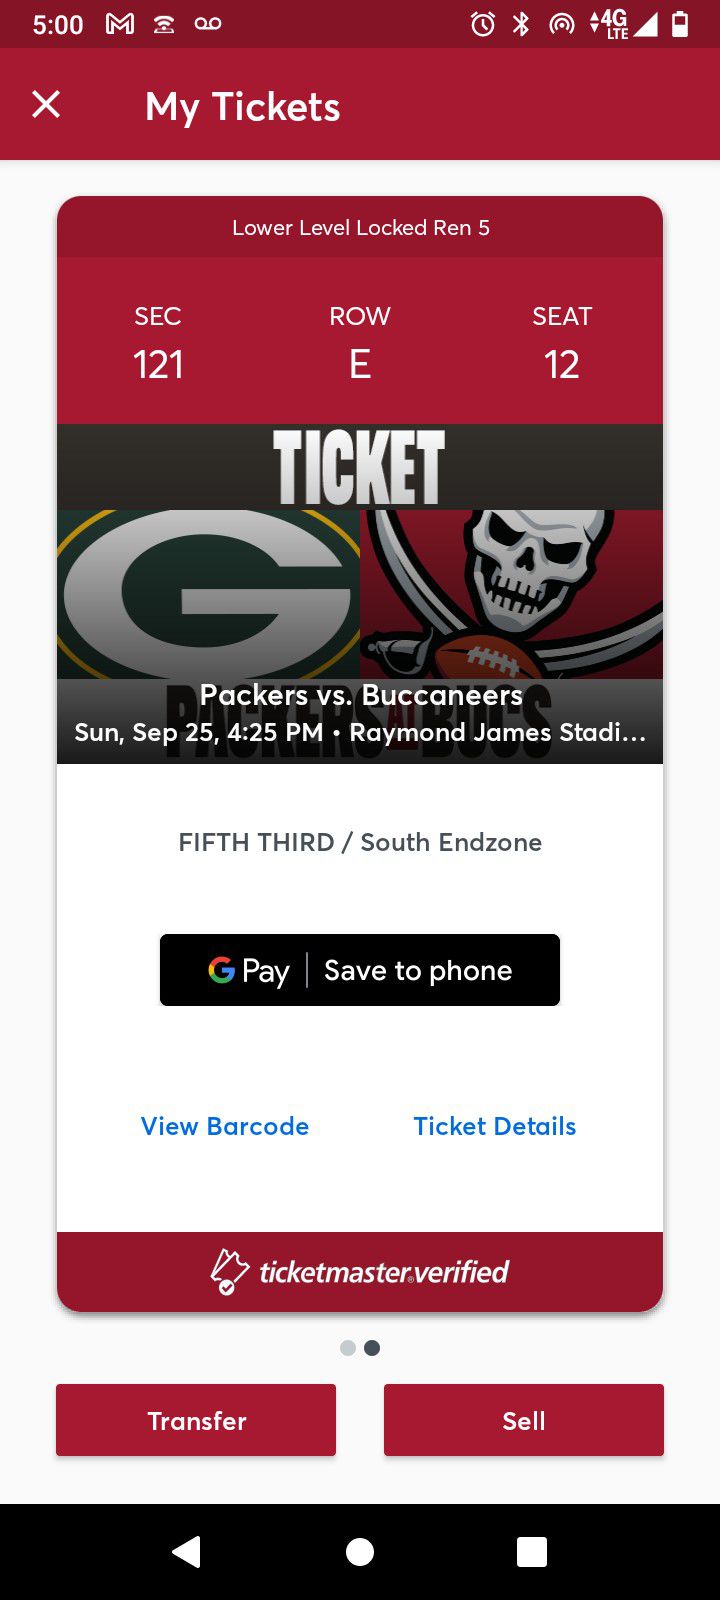 Two BUCS VS PACKERS Tickets